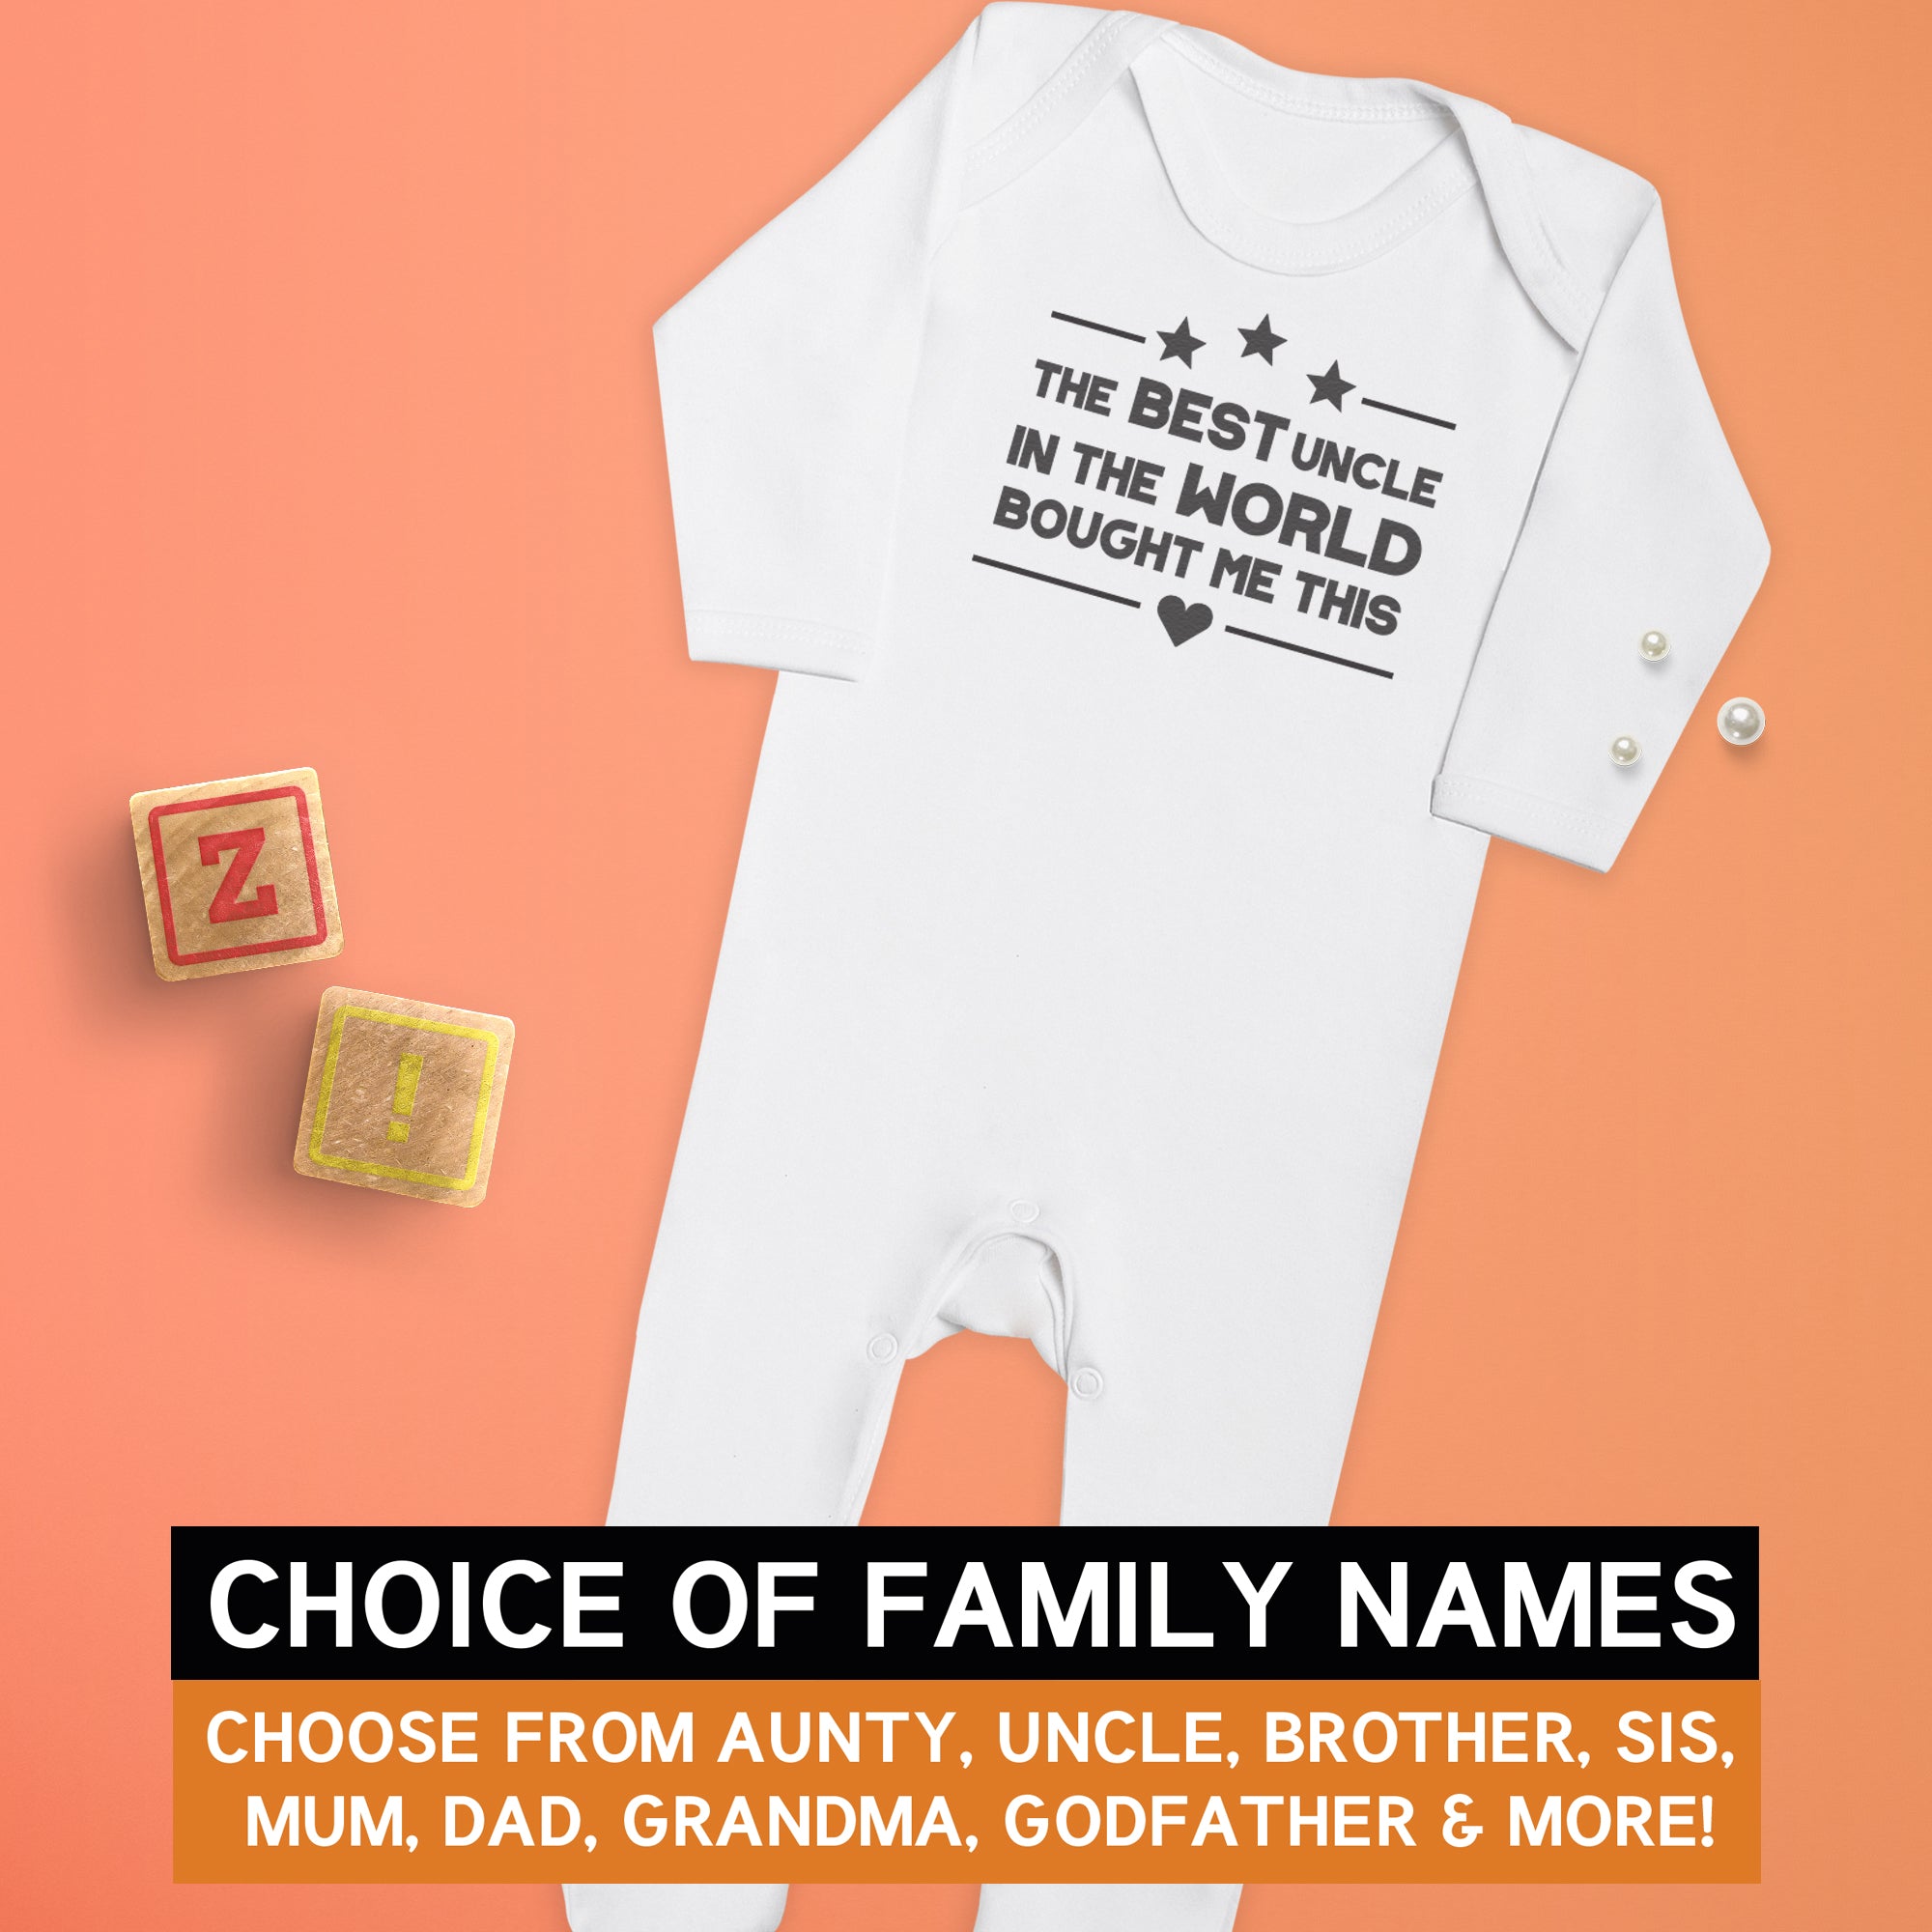 Pick A Family Name - The Best Mummy, Auntie, Grandad and more In The World Brought This - Baby Romper